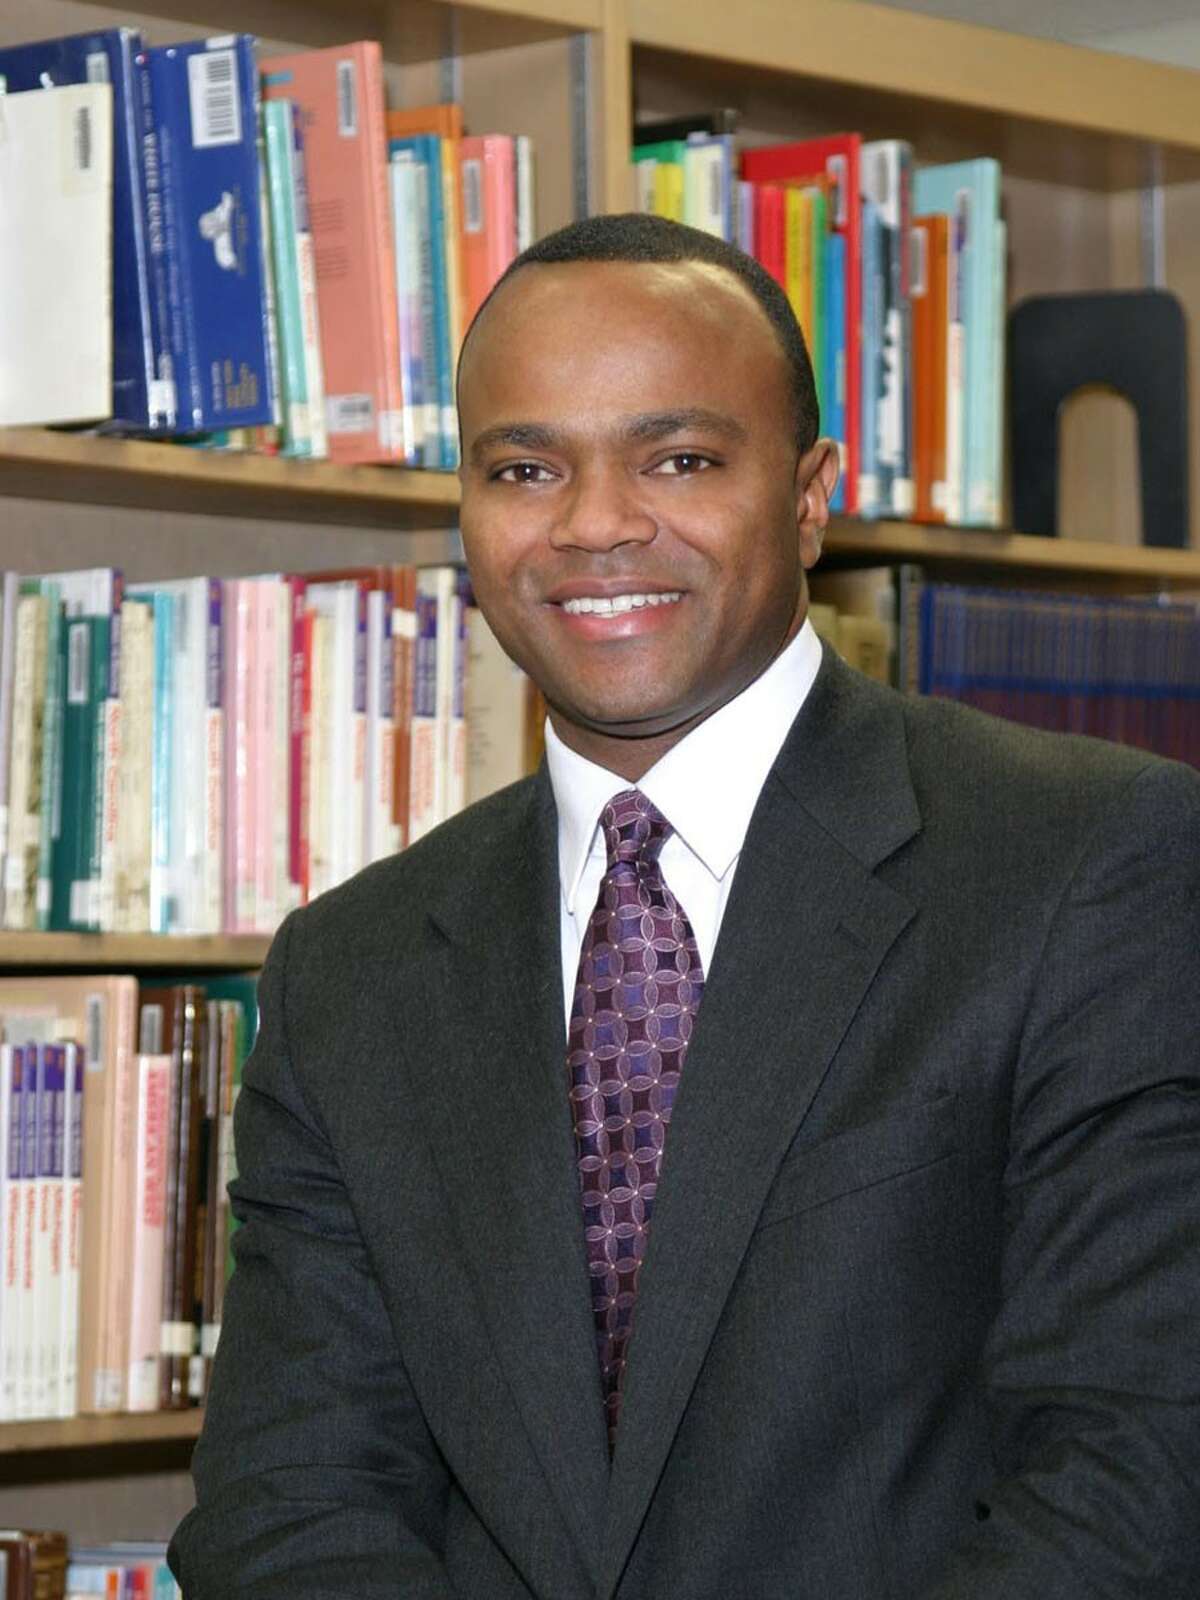 Shenendehowa schools Superintendent L. Oliver Robinson will deliver a presentation Tuesday night about how to implement full-day kindergarten.